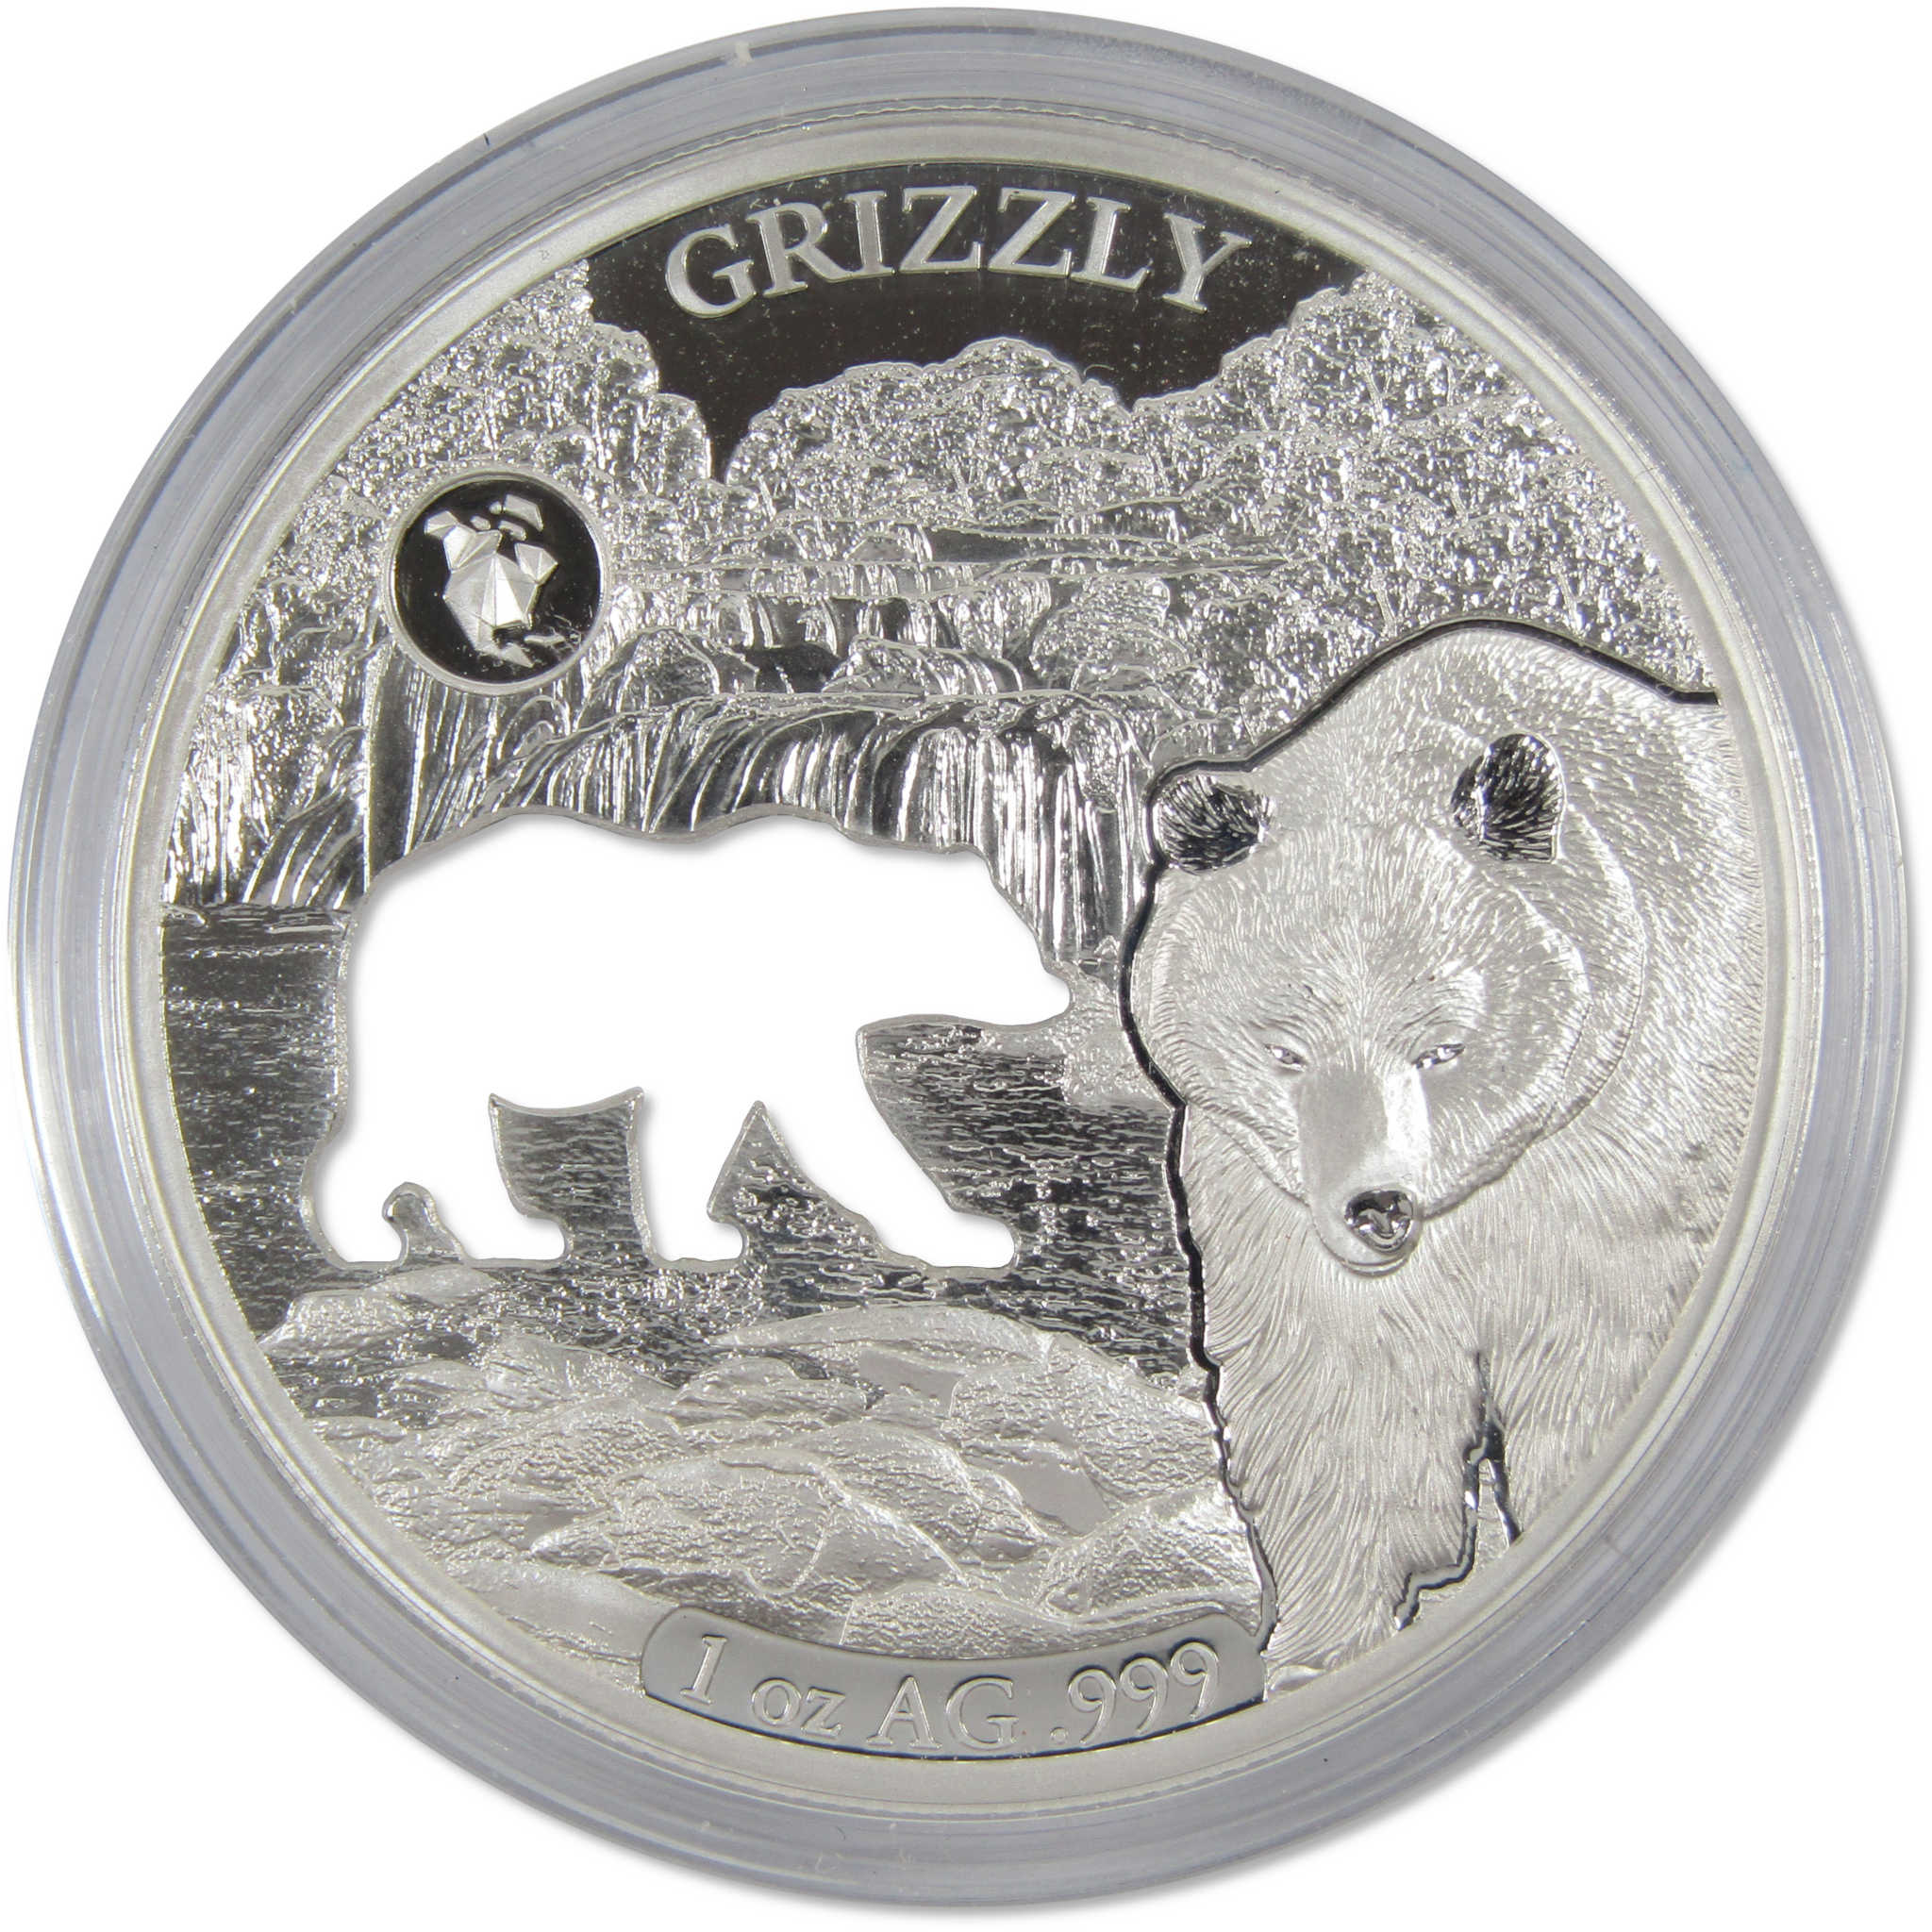 Shapes of America Grizzly 1 oz .999 Silver $5 Proof-Like Coin 2020 Barbados COA